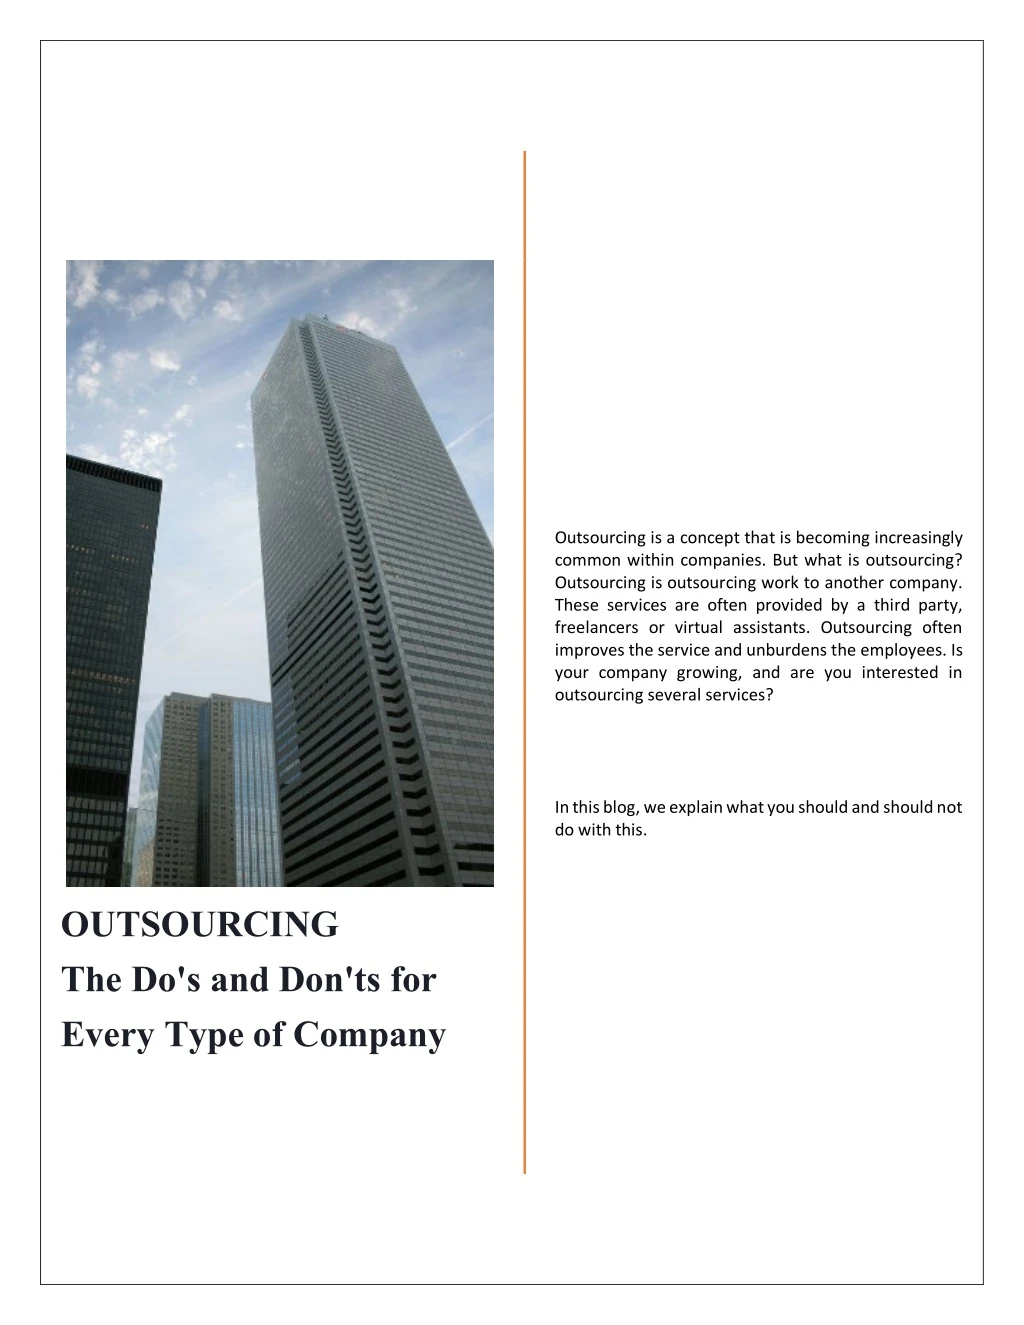 outsourcing is a concept that is becoming